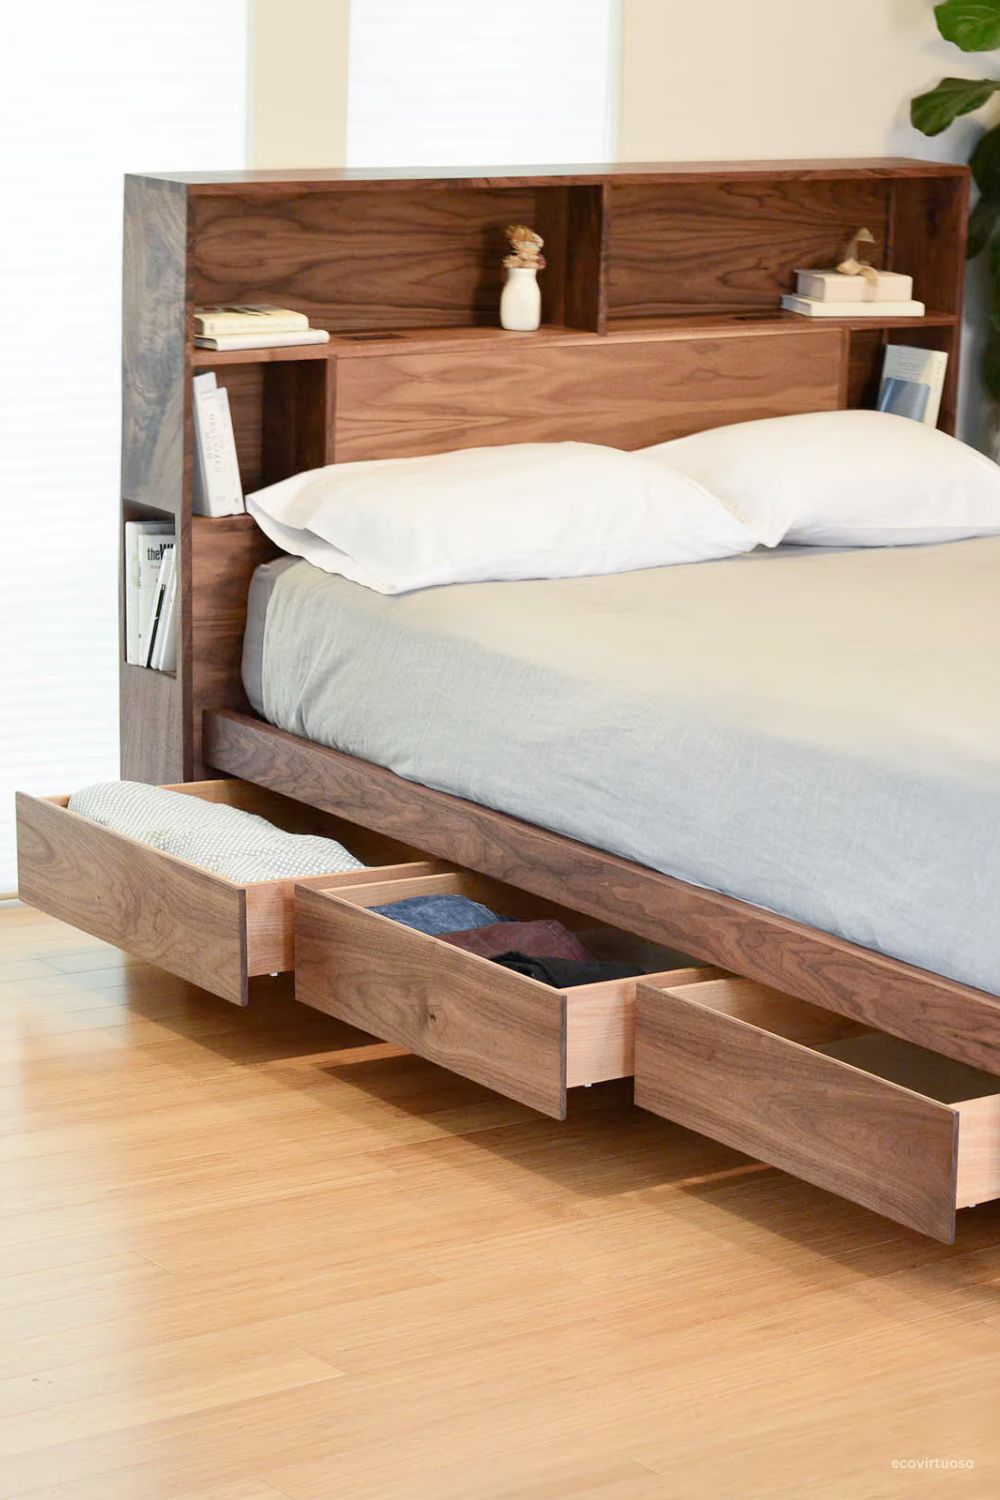 a bed with headboard and storage